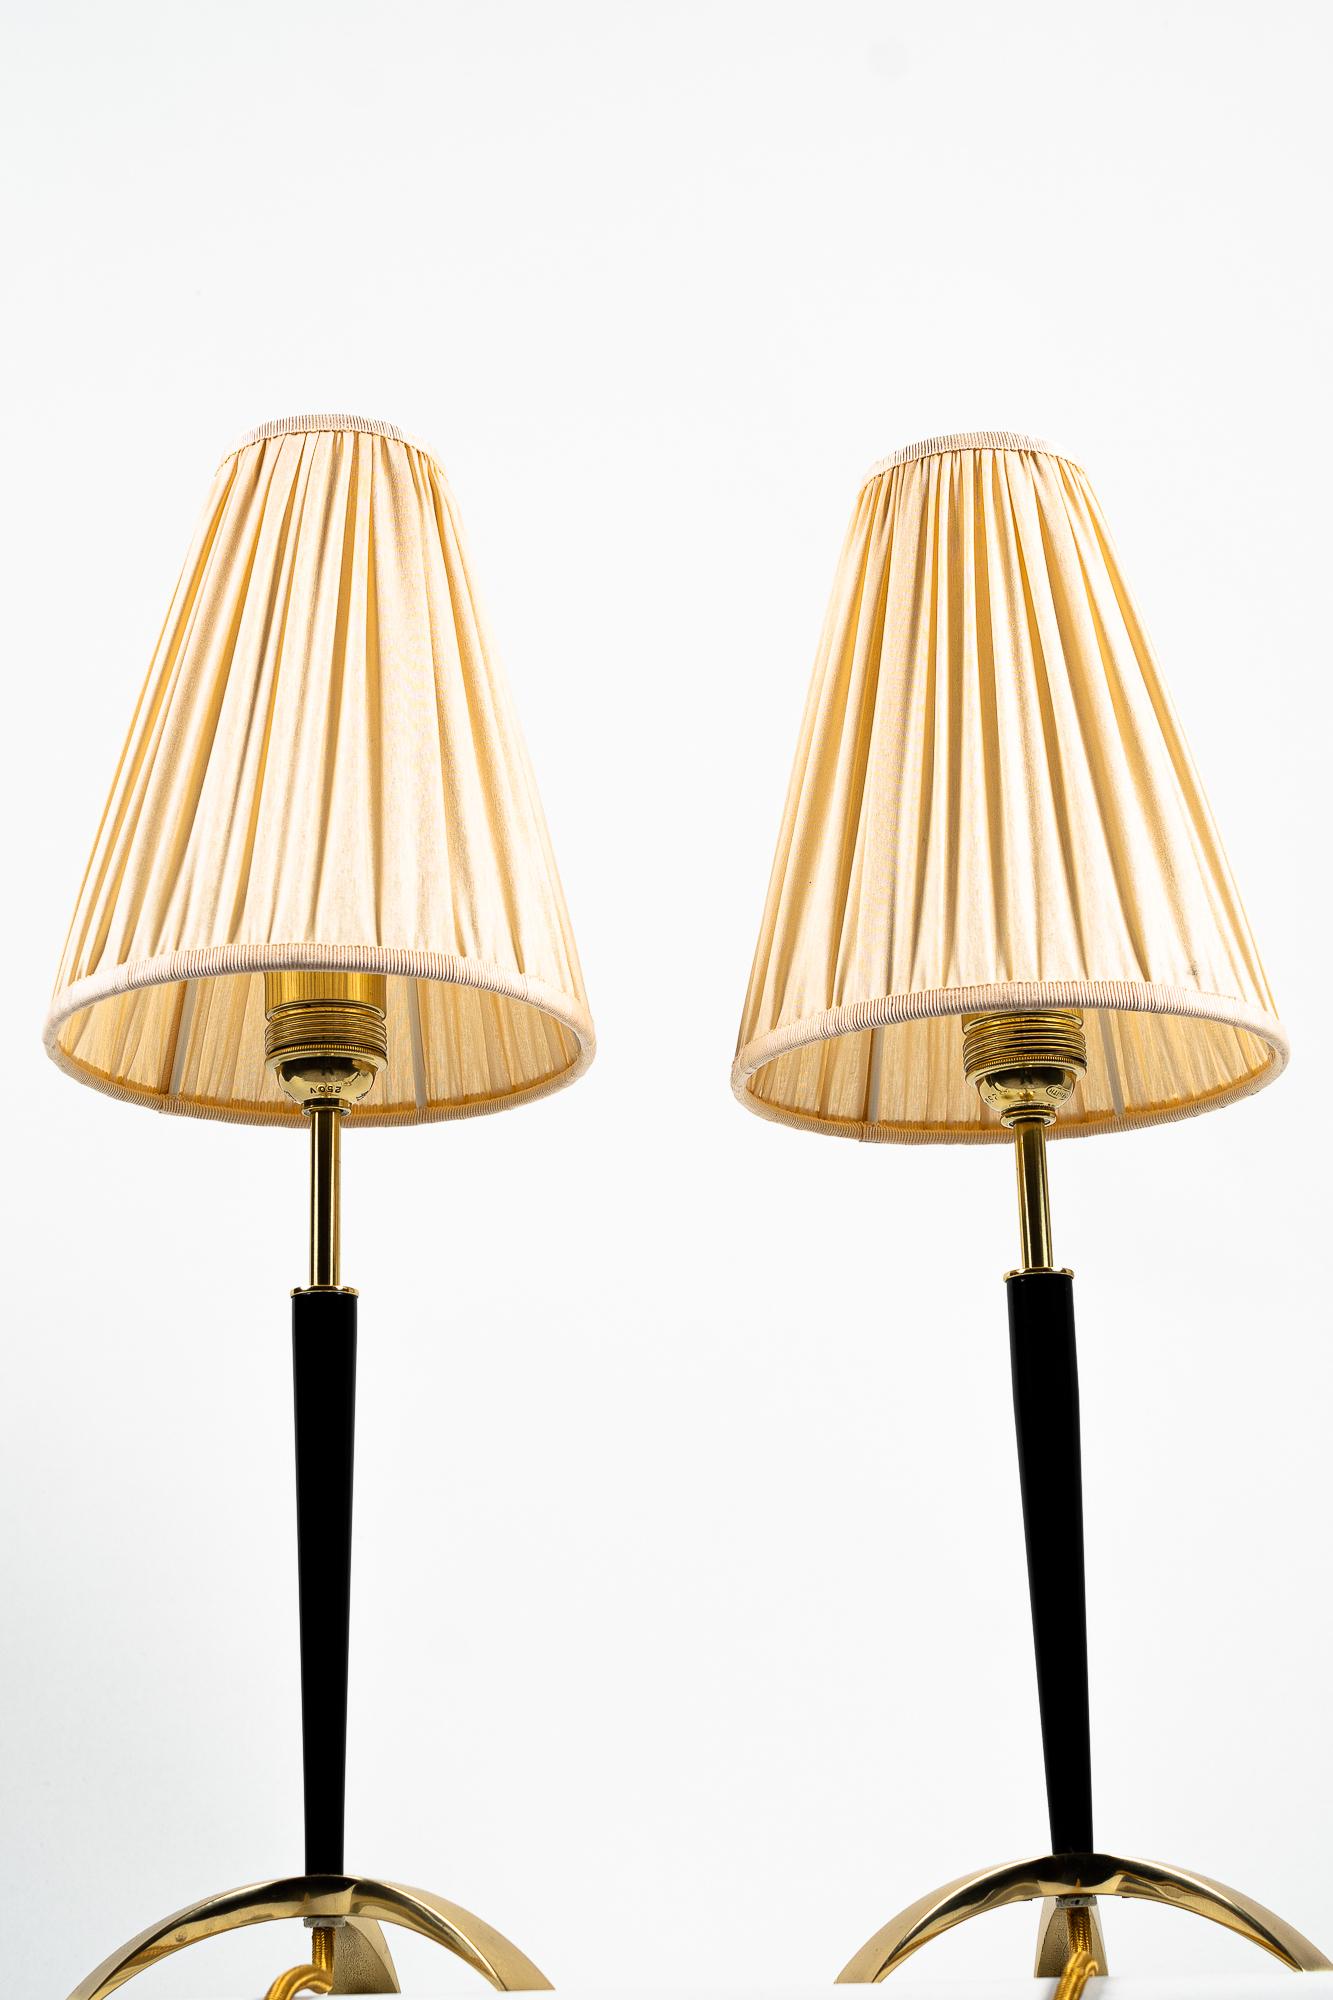 Two extendable table lamps by J.T. Kalmar, circa 1950s
Extendable in the hight from 50cm up to 54cm
Brass parts are polished and stove enamelled
The Fabric is replaced ( new )
Pair price.